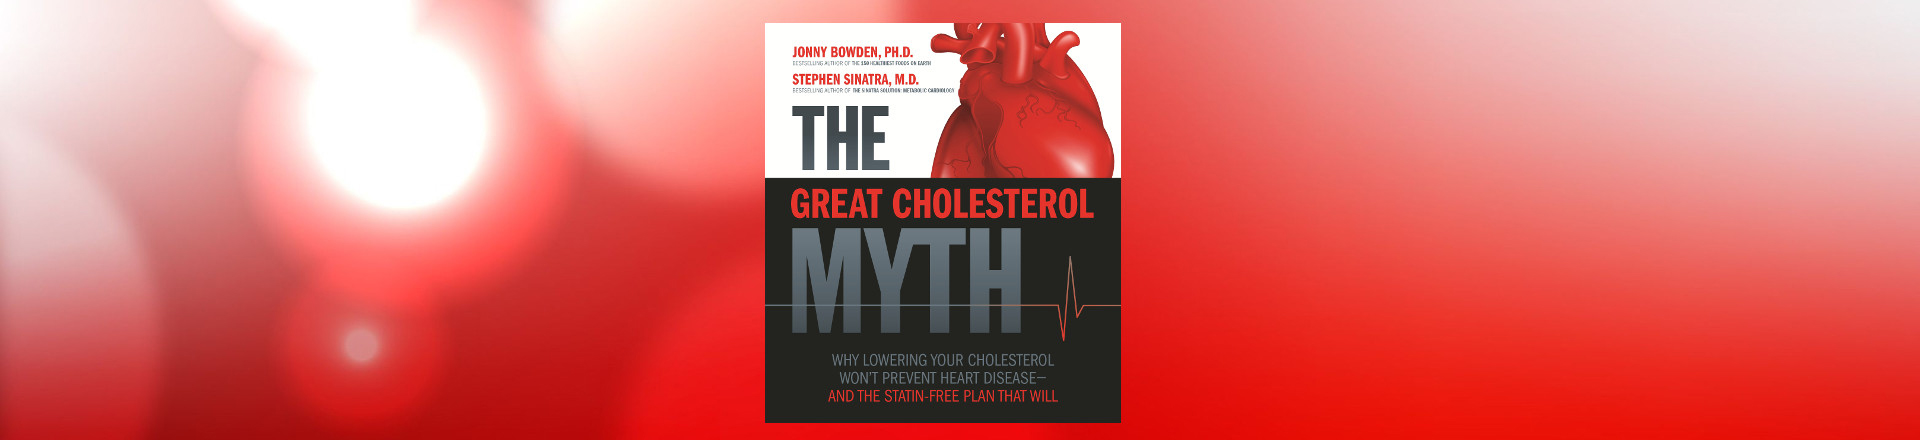 Dr. Sinatra discusses The Great Cholesterol Myth on the 700 Club